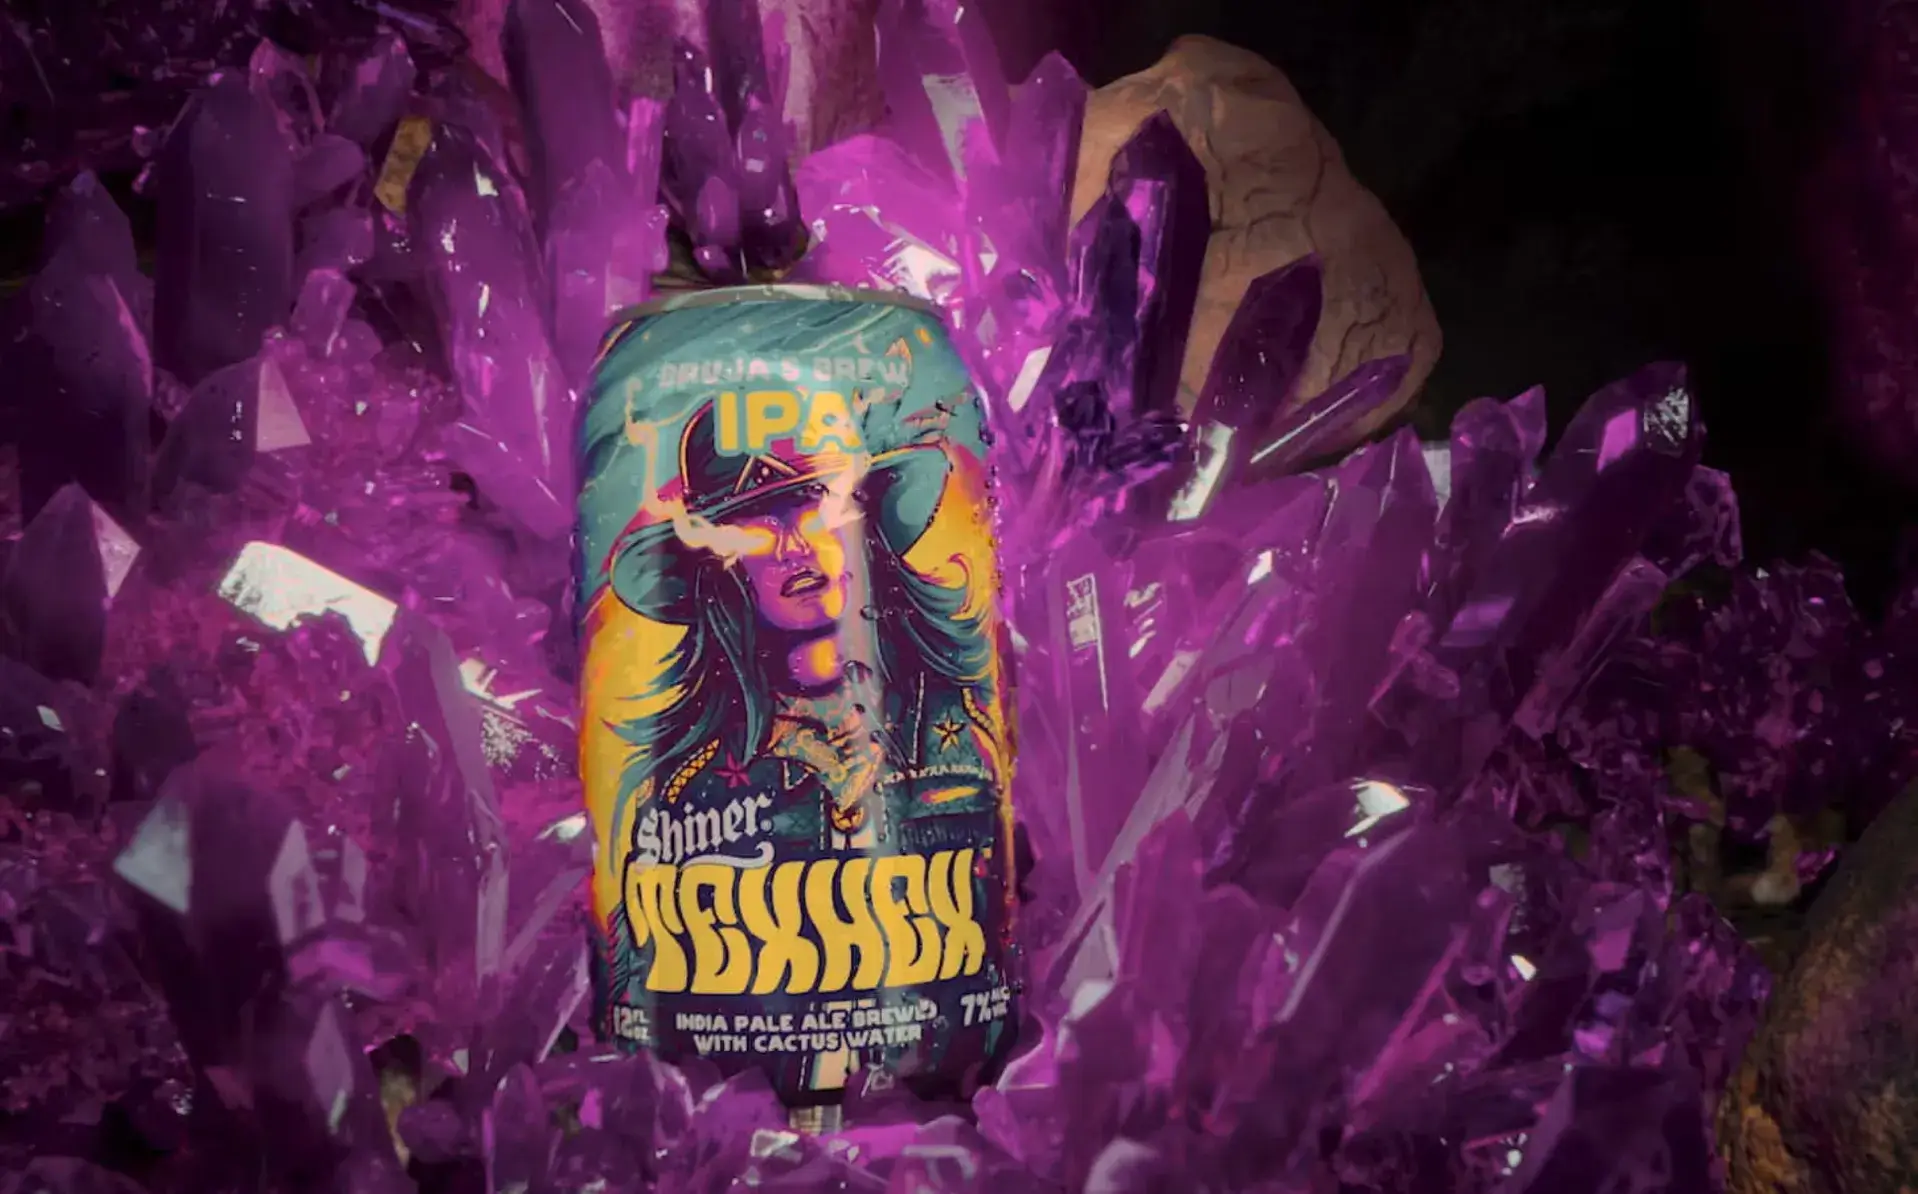 A can of Texhex IPA surrounded by purple crystals.